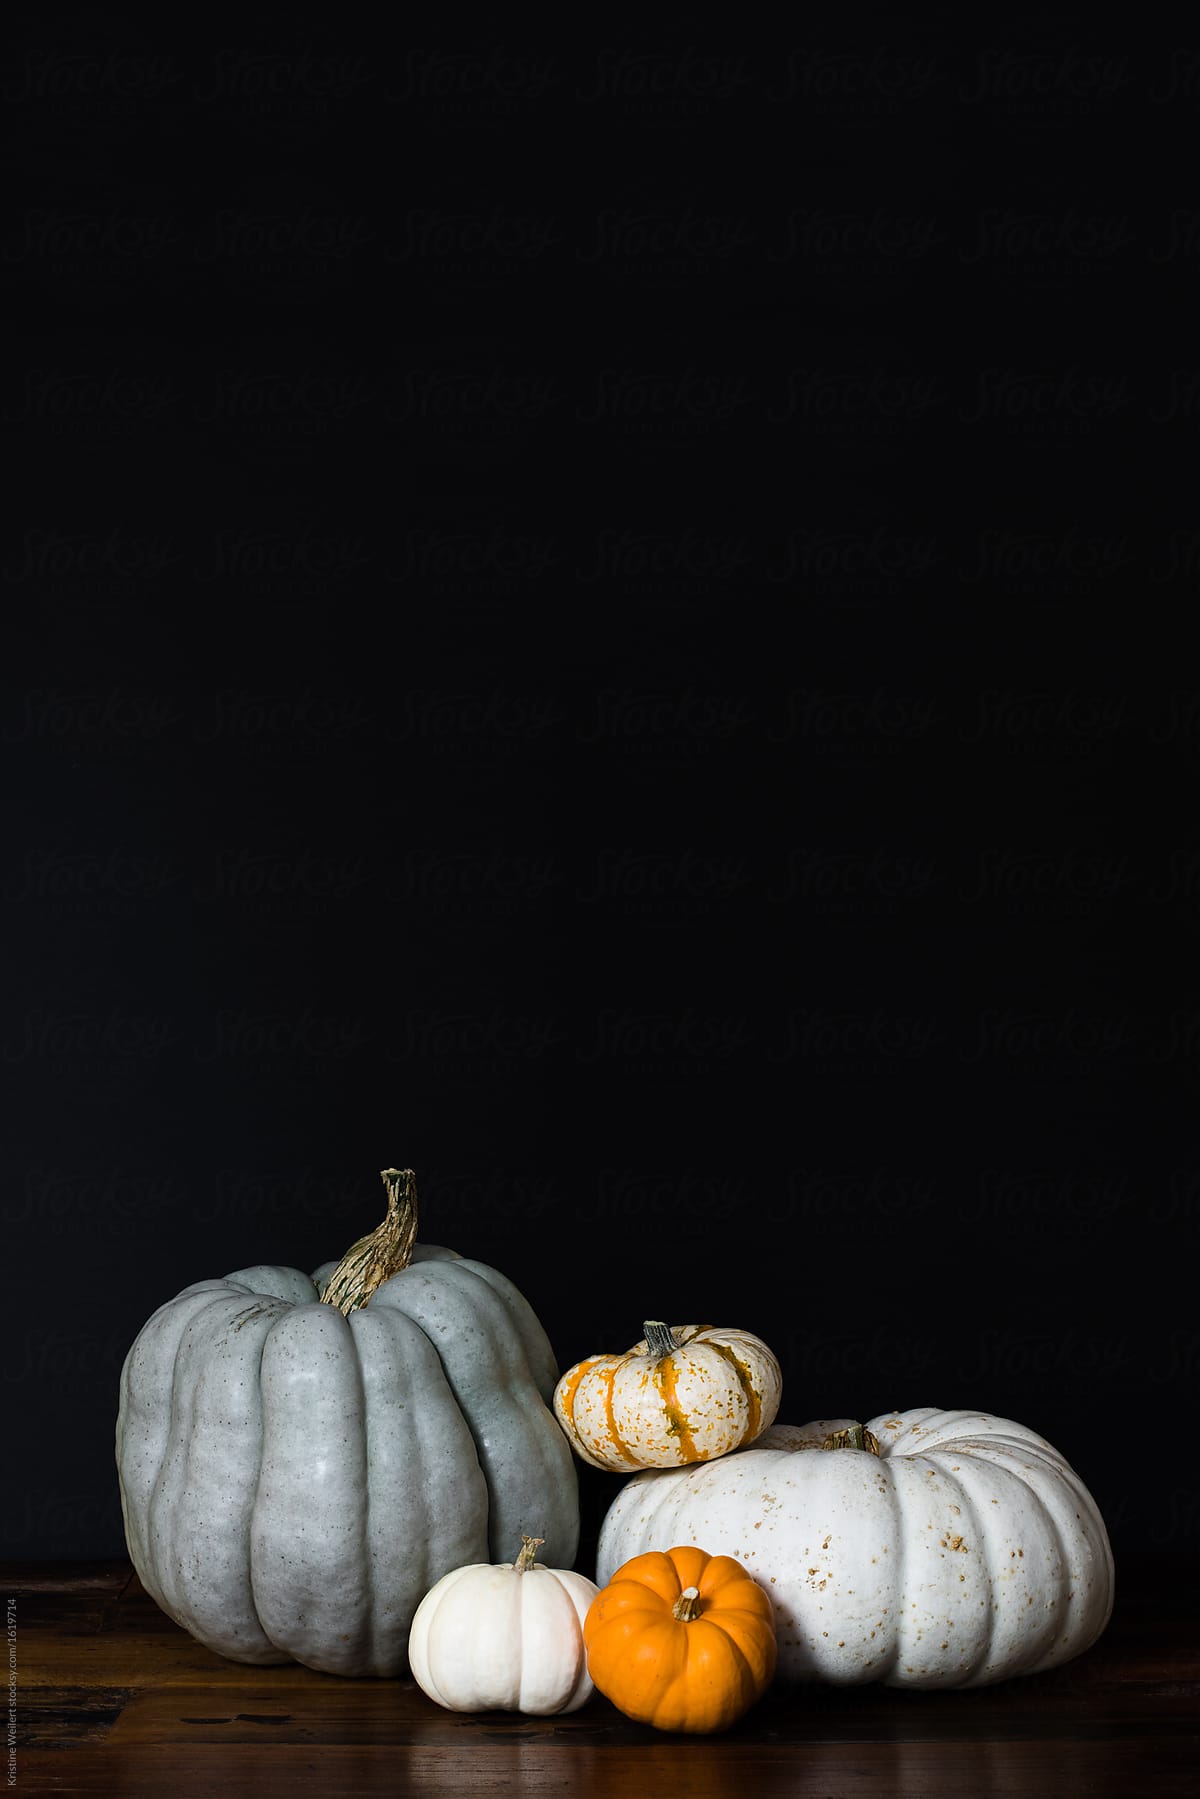 Variety of pumpkins stacked on table with dark background